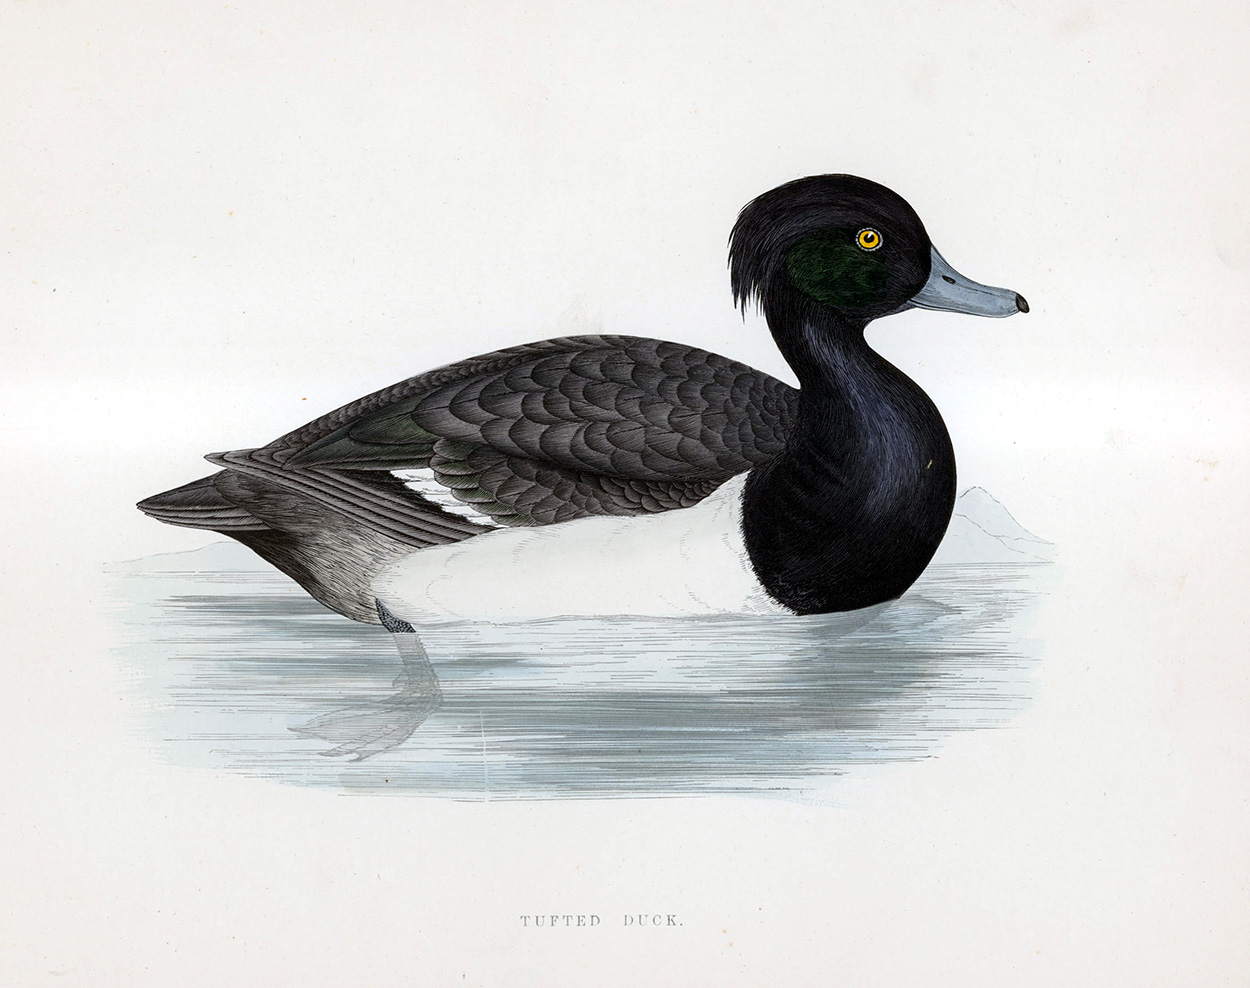 Tufted Duck - hand coloured lithograph 1891 (Print) art by Beverley R Morris at The Illustration Art Gallery